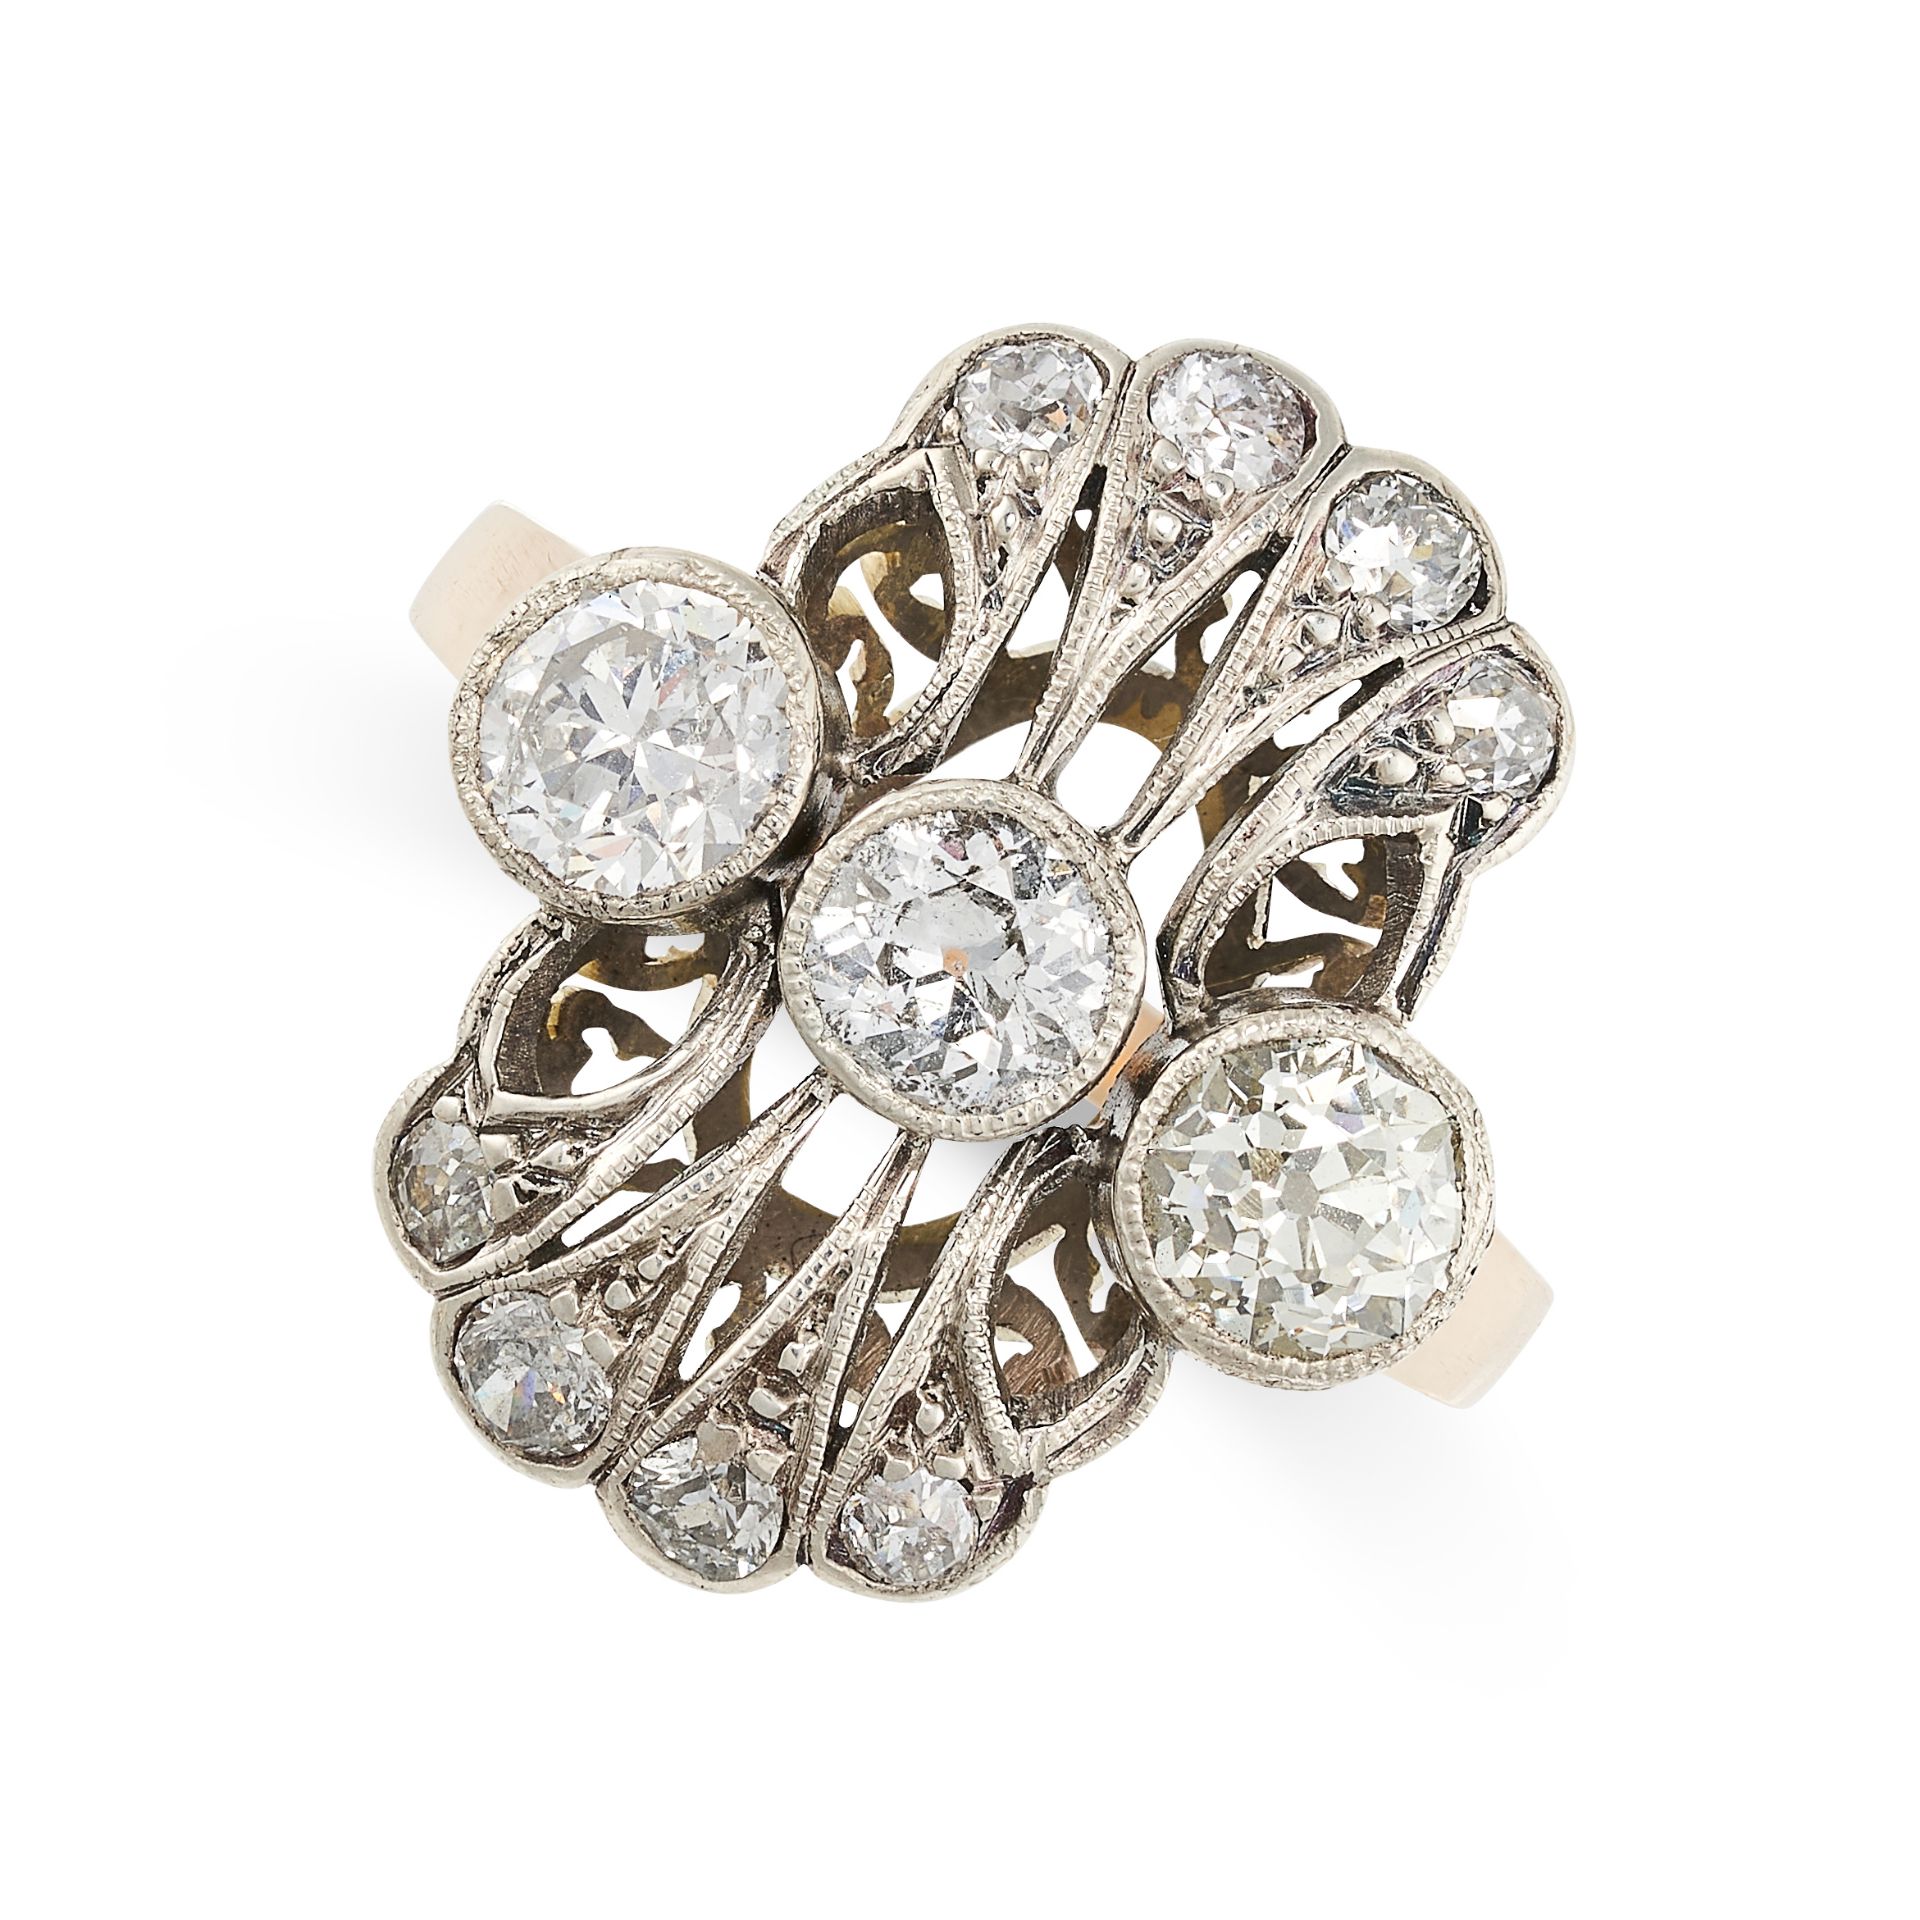 A DIAMOND DRESS RING, CIRCA 1940 in yellow gold and silver, set with old cut diamonds, the